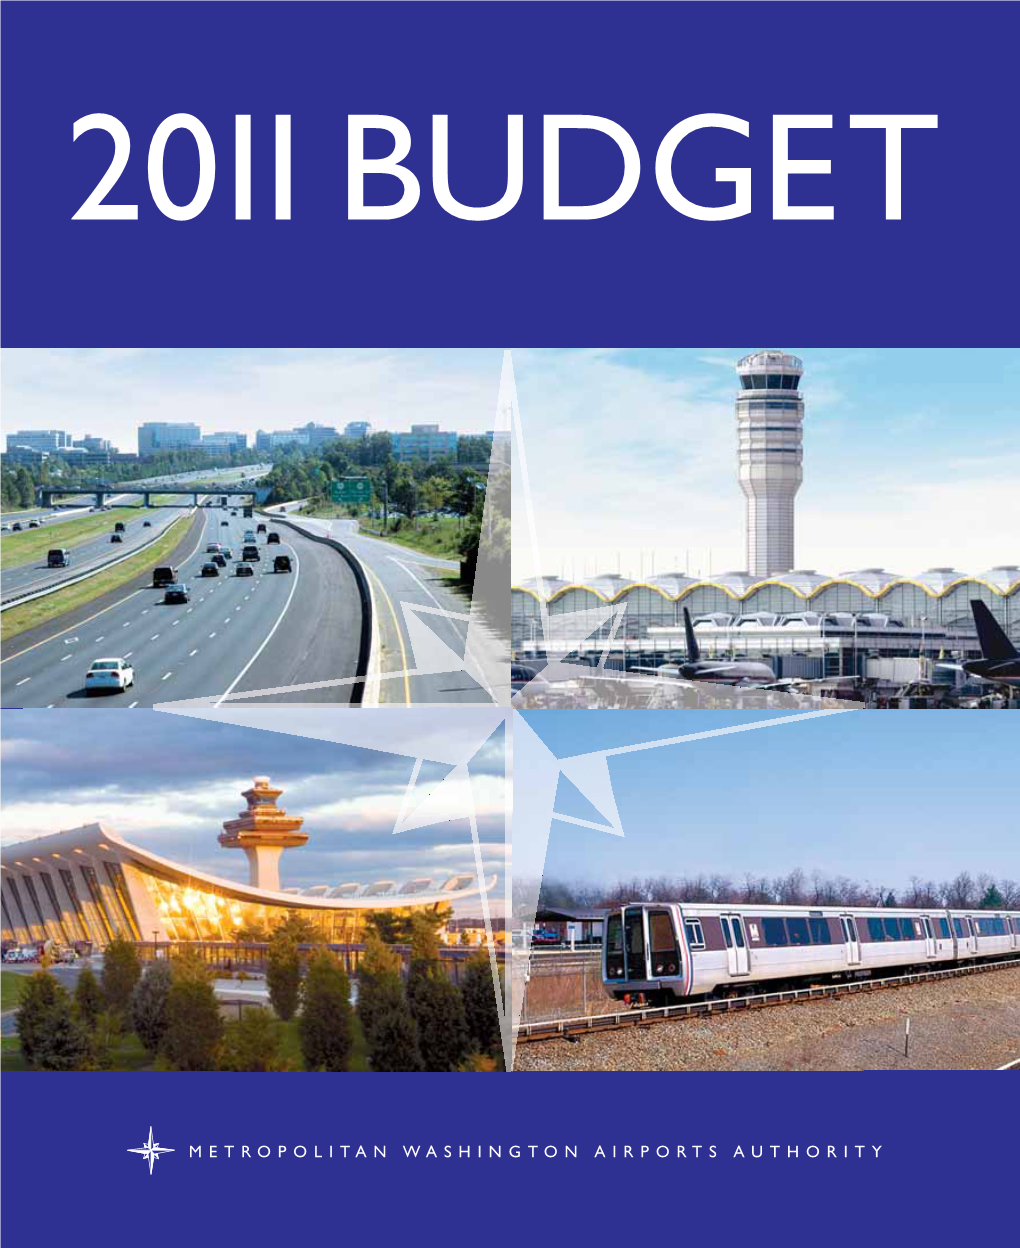 Metropolitan Washington Airports Authority for Its Annual Budget for the Fiscal Year Beginning January 1, 2010